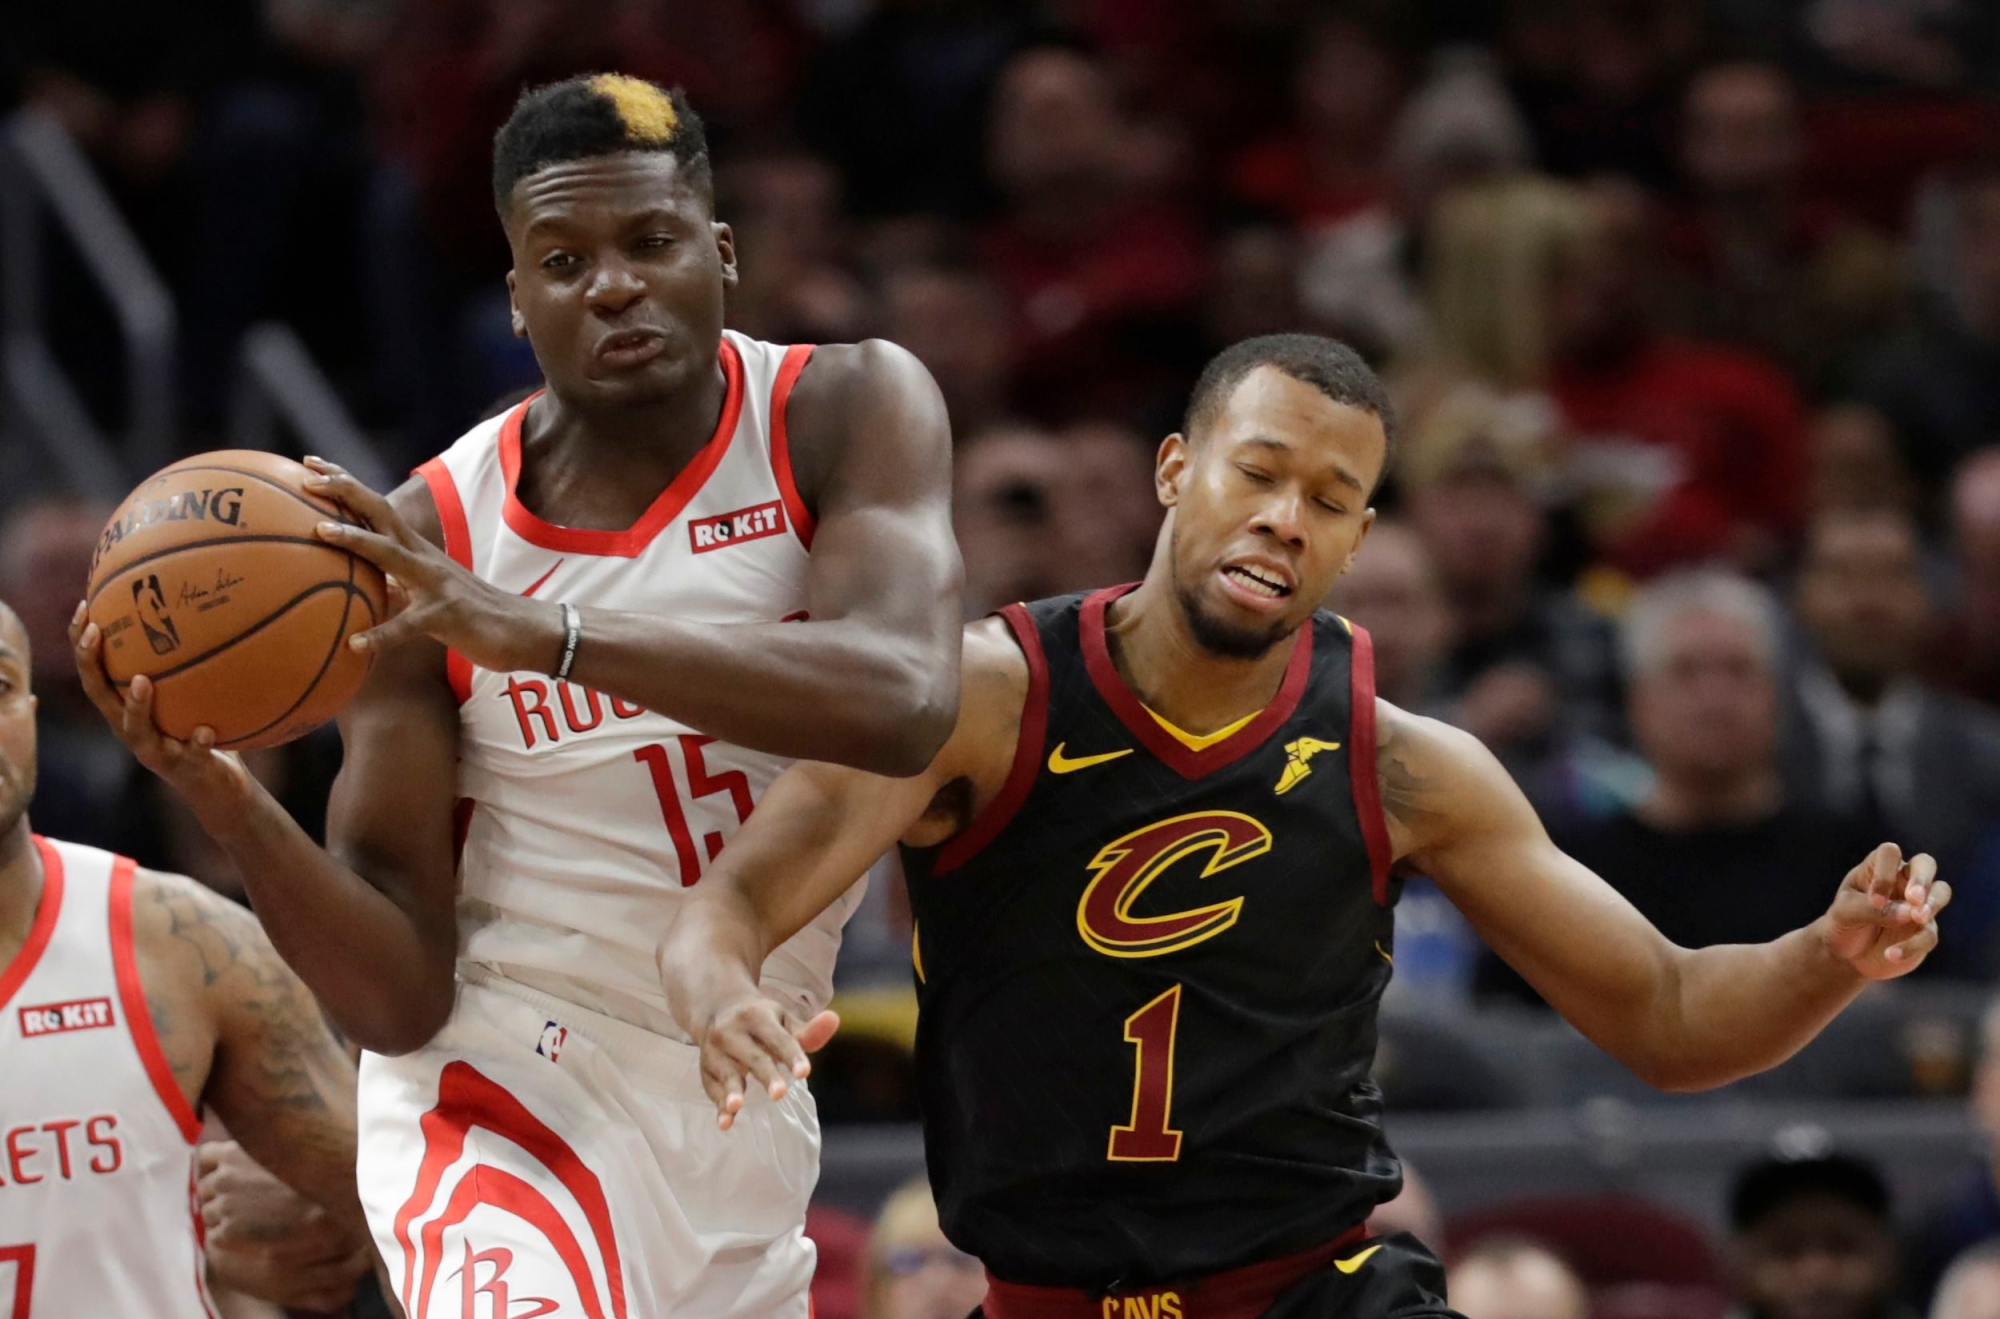 Houston Rockets' Clint Capela (15), from Switzerland, and Cleveland Cavaliers' Rodney Hood (1) battle for a rebound in the first half of an NBA basketball game, Saturday, Nov. 24, 2018, in Cleveland. (AP Photo/Tony Dejak) ROCKETS CAVALIERS BASKETBALL